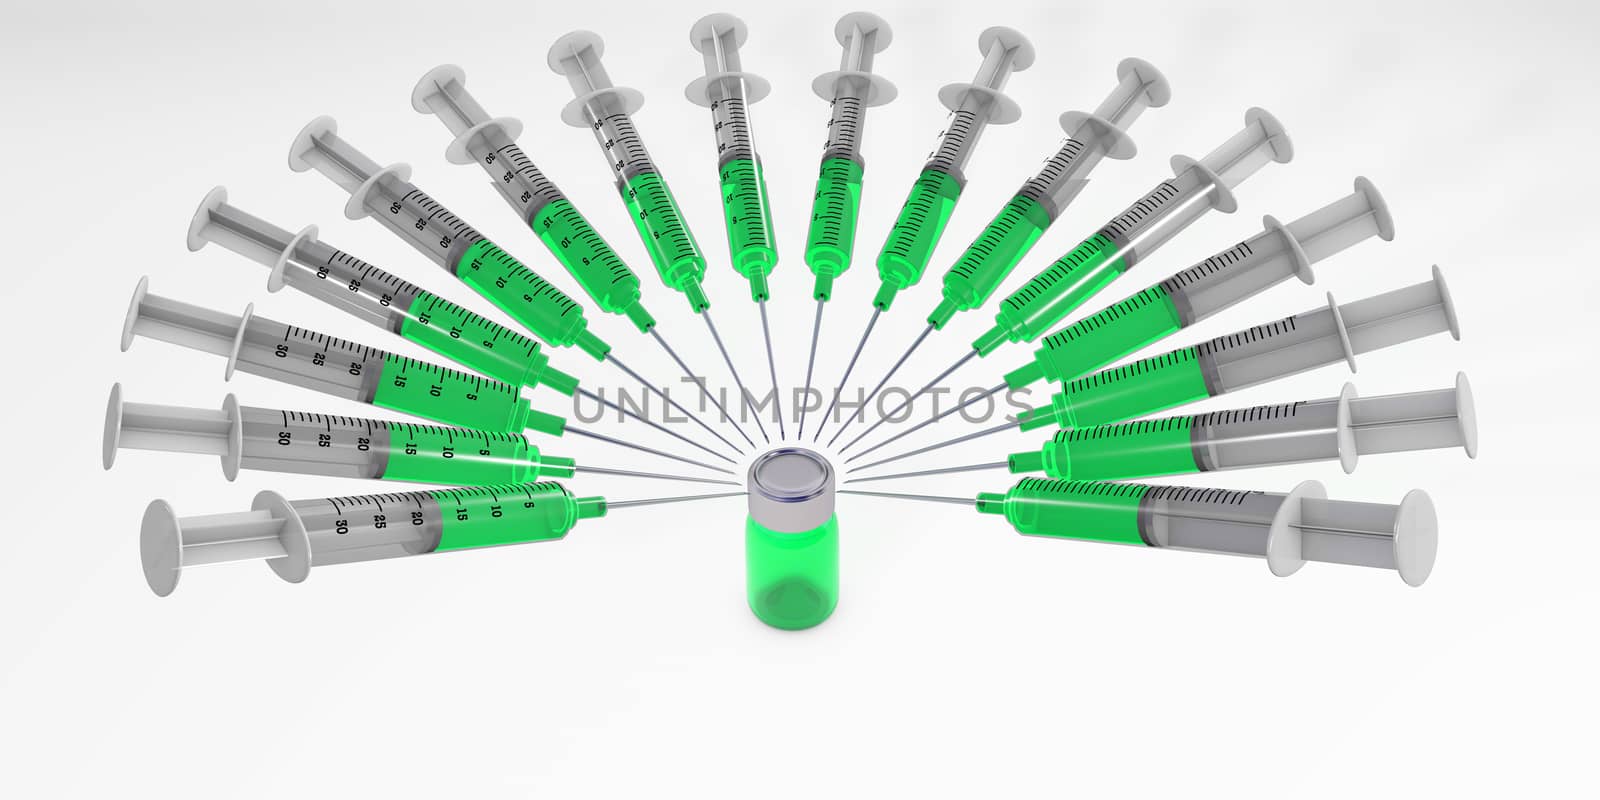 syringes arround a medicine bottle 3d rendering isolated on white